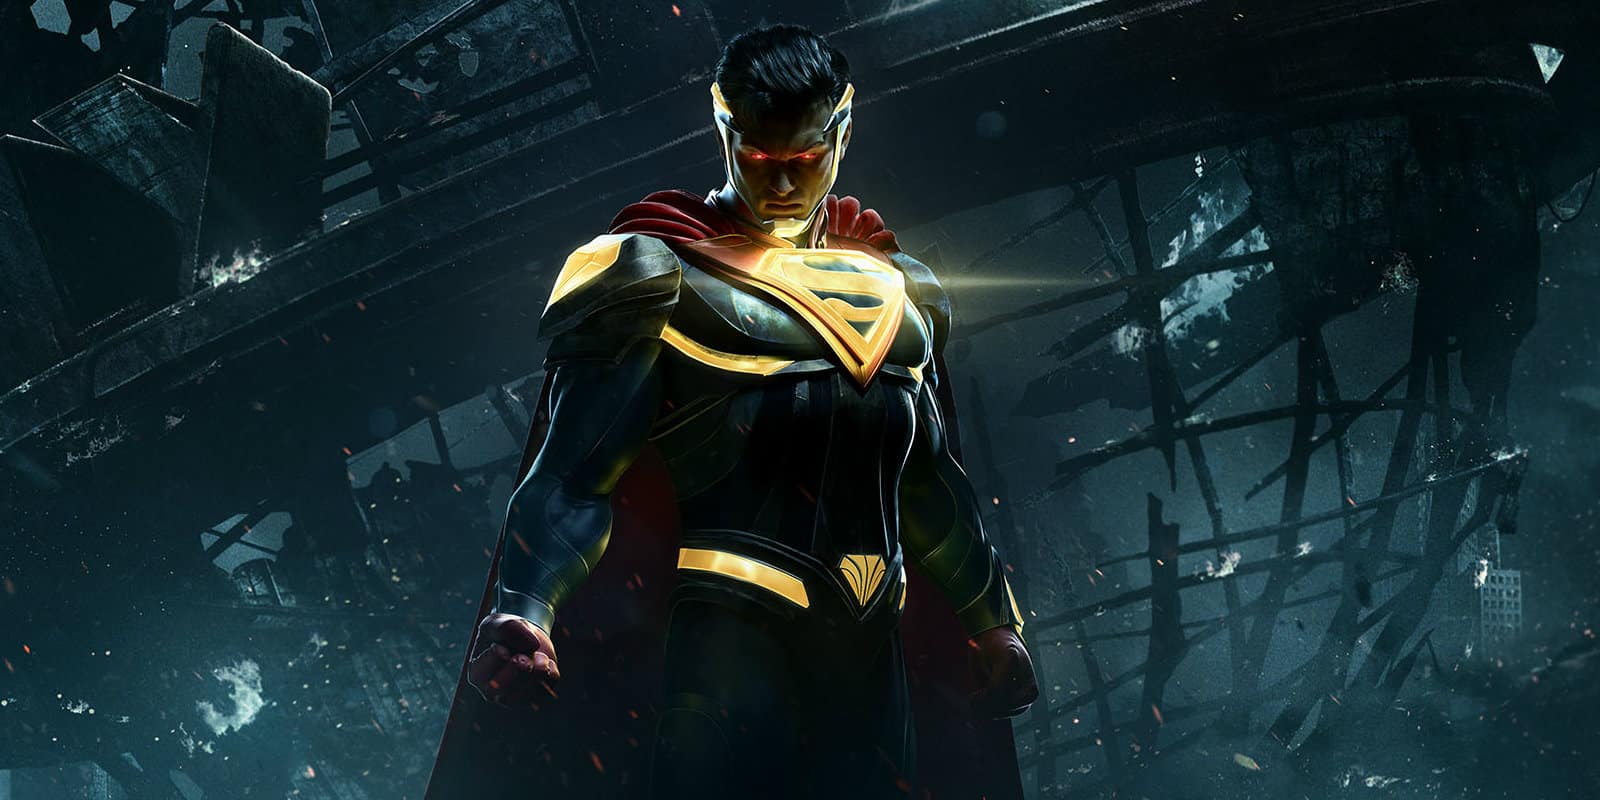 Superman from the video game Injustice 2 released by NetherRealm Studios in 2017. His eyes glow red and he stands in front of a destroyed Daily Planet globe.